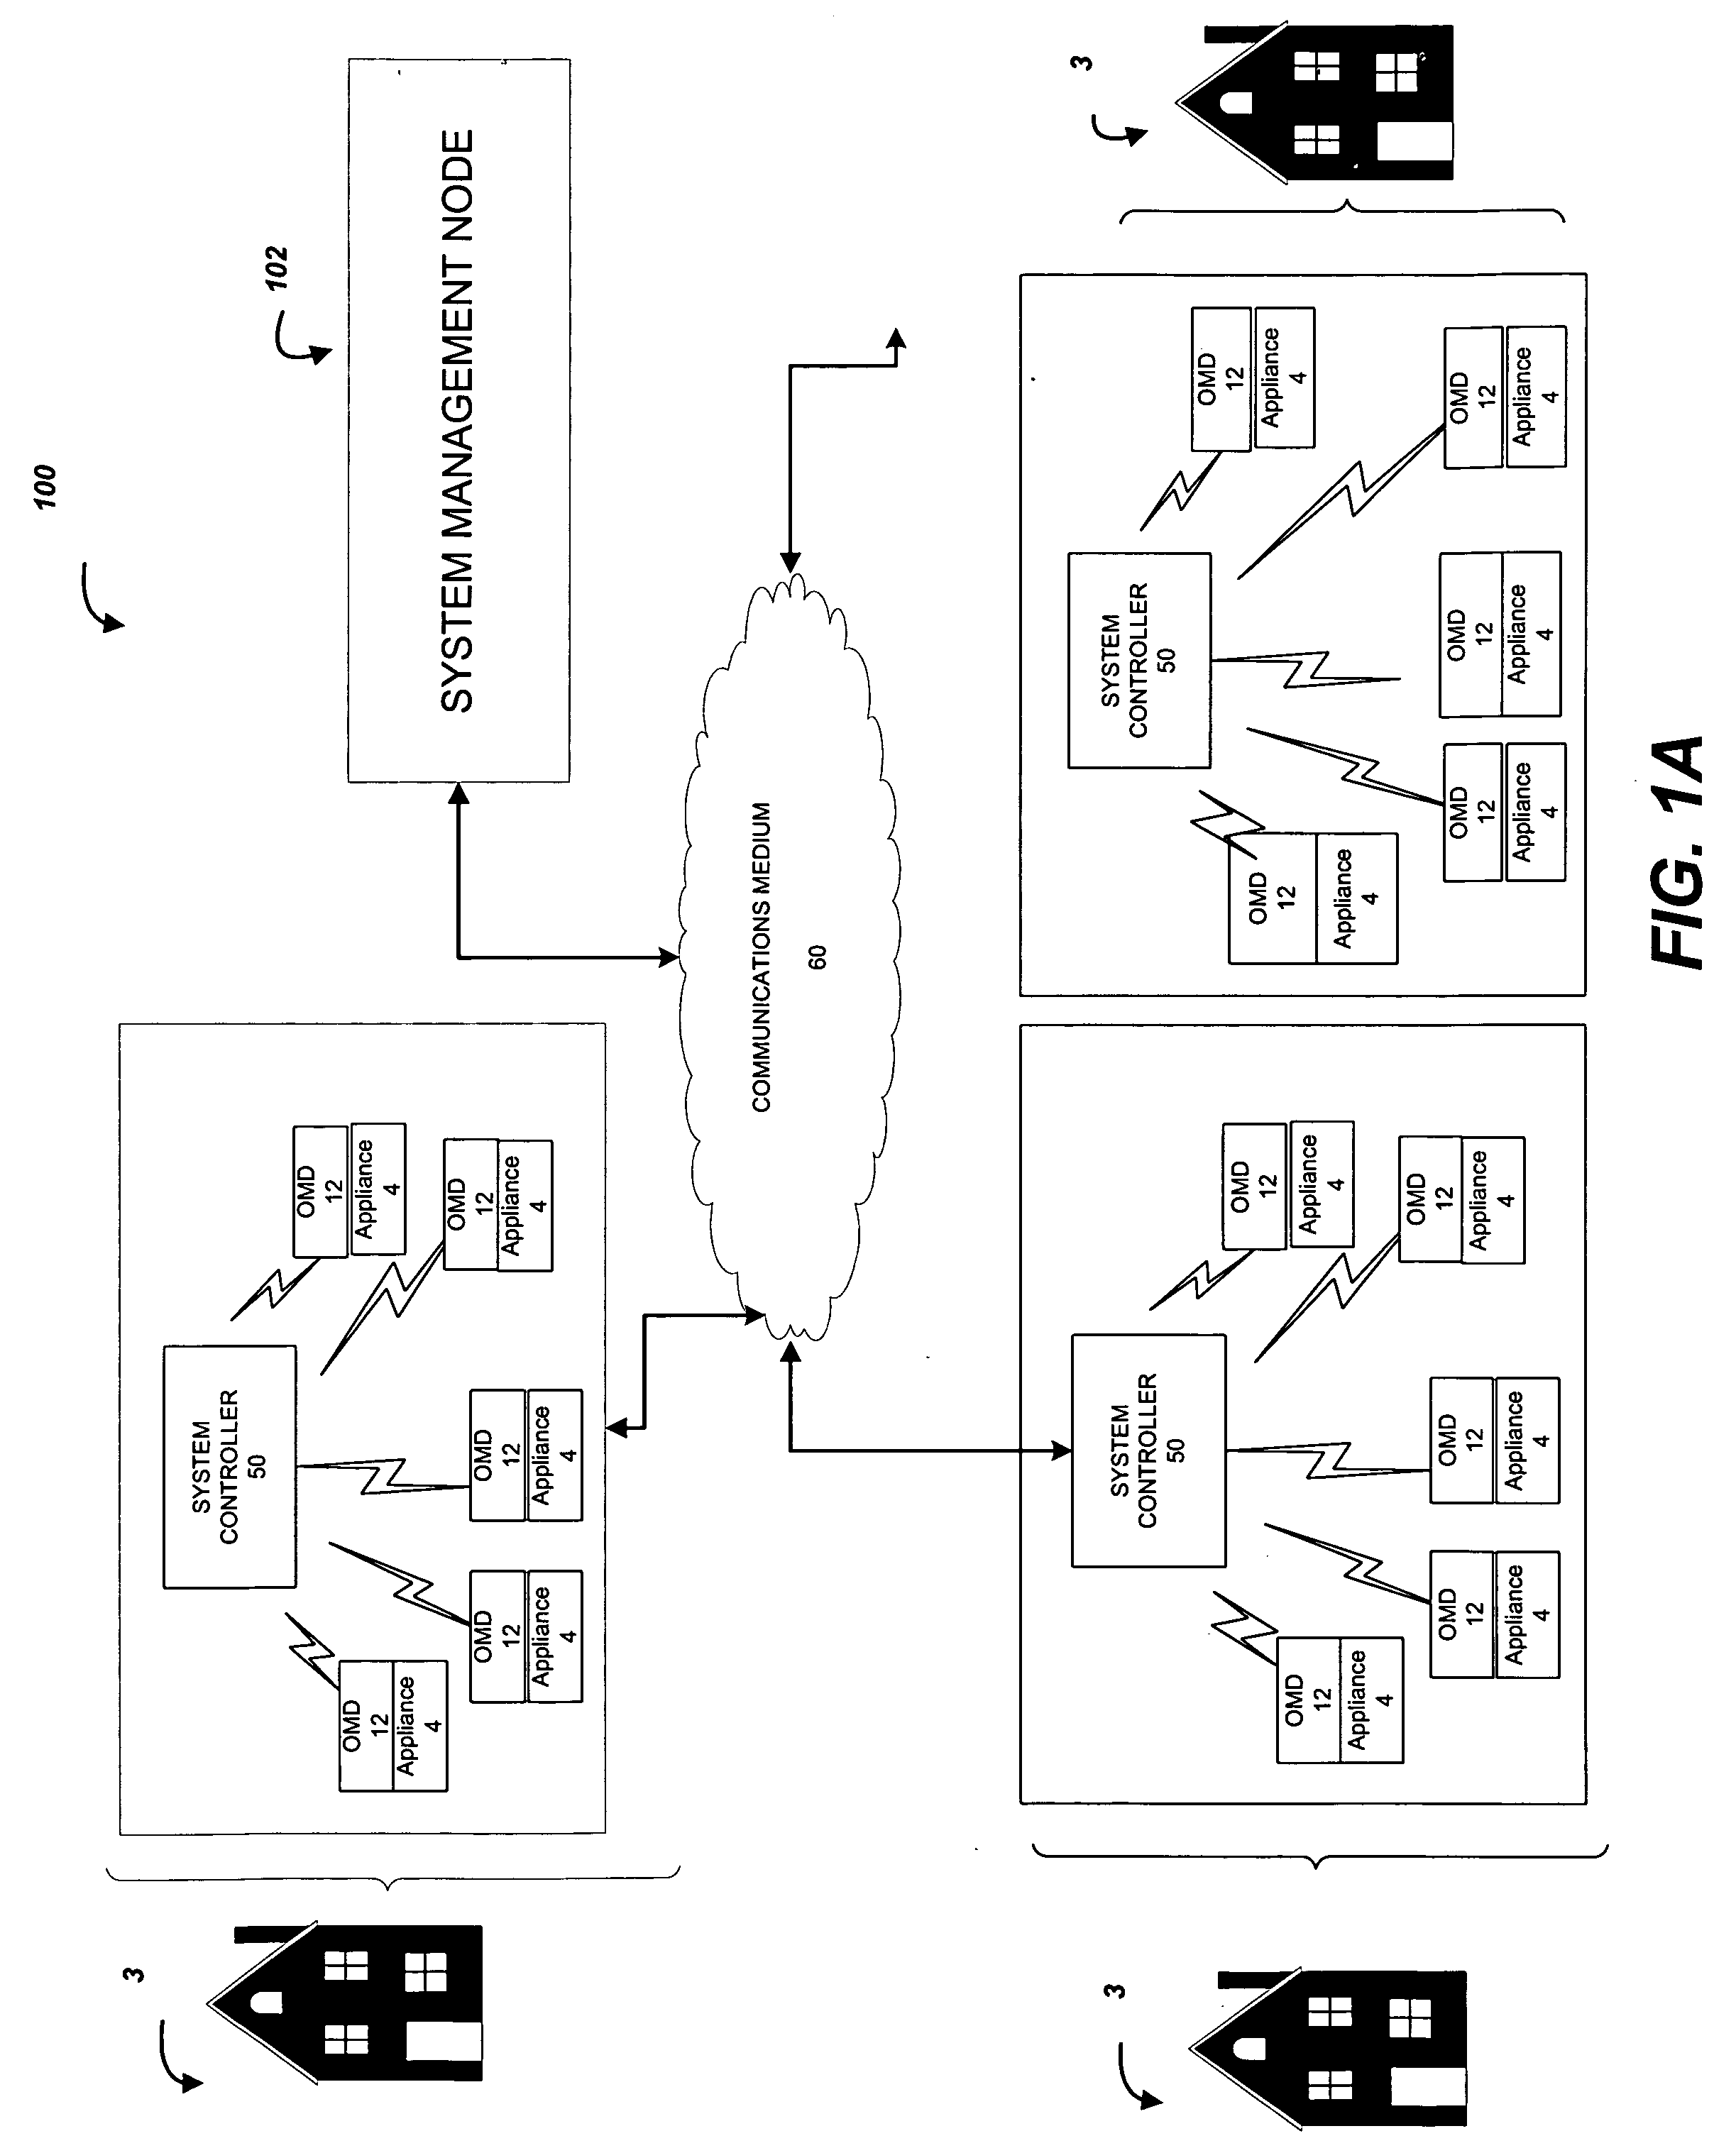 System and method for utility usage, monitoring and management